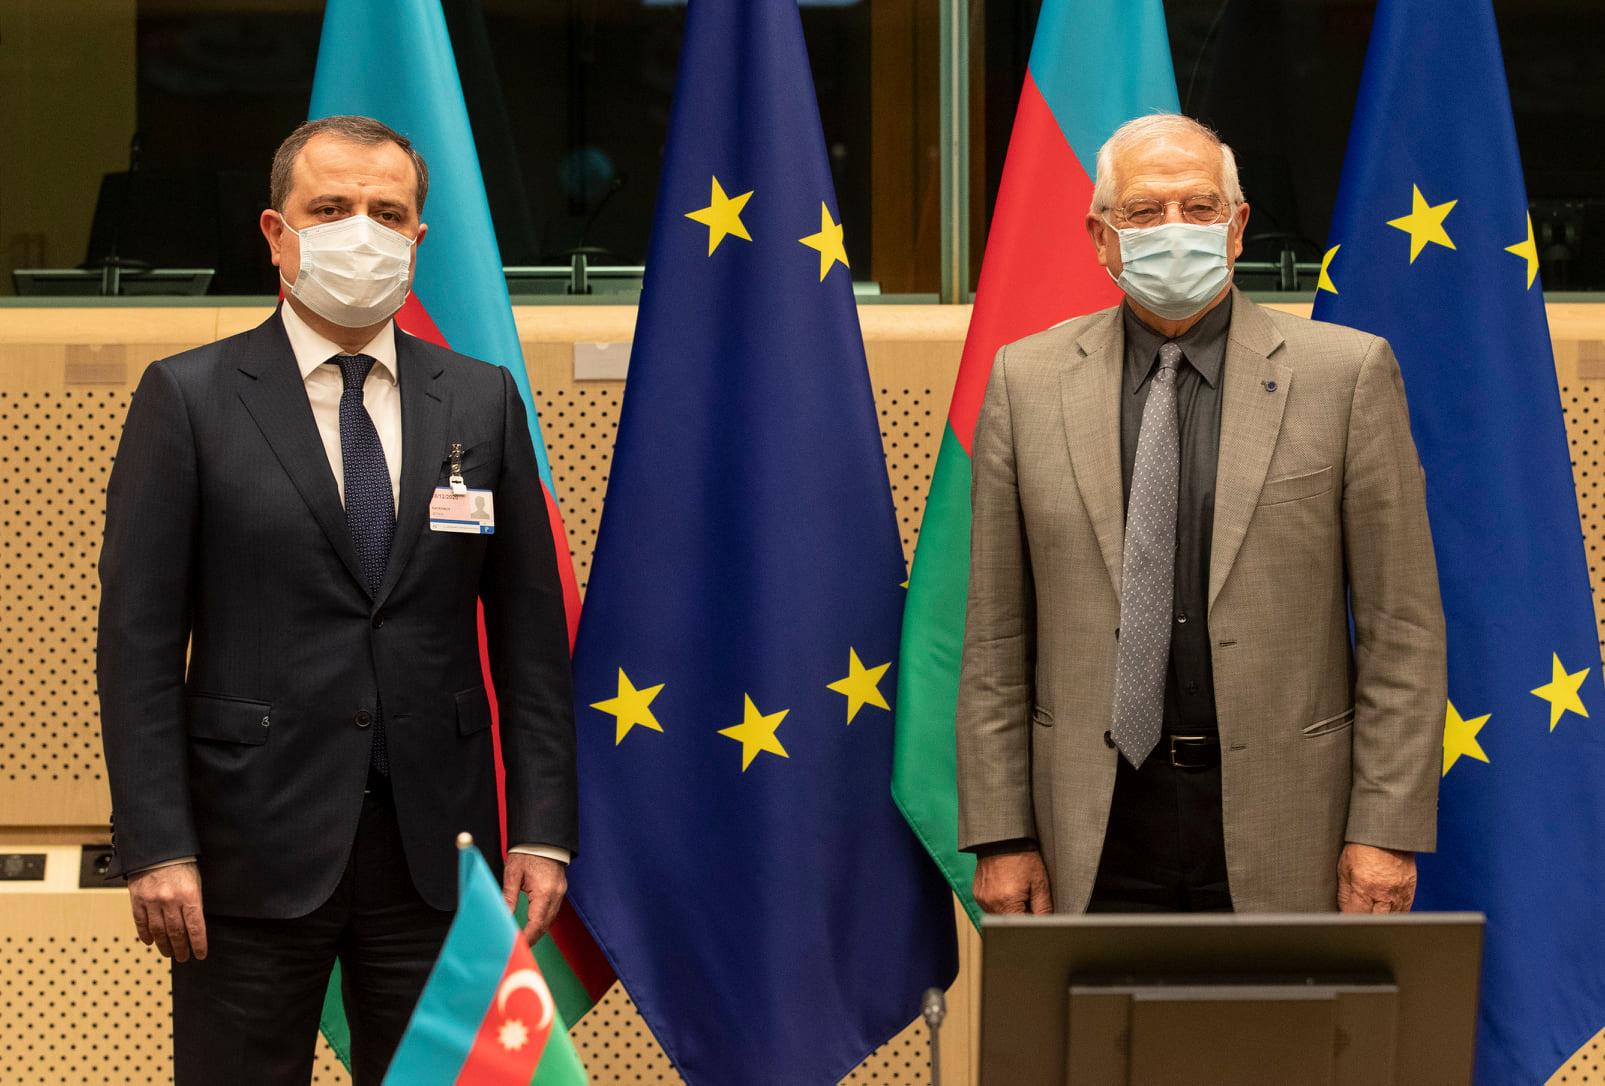 The EU’s engagement with Azerbaijan: less for less or compartmentalize for more? A view from Baku